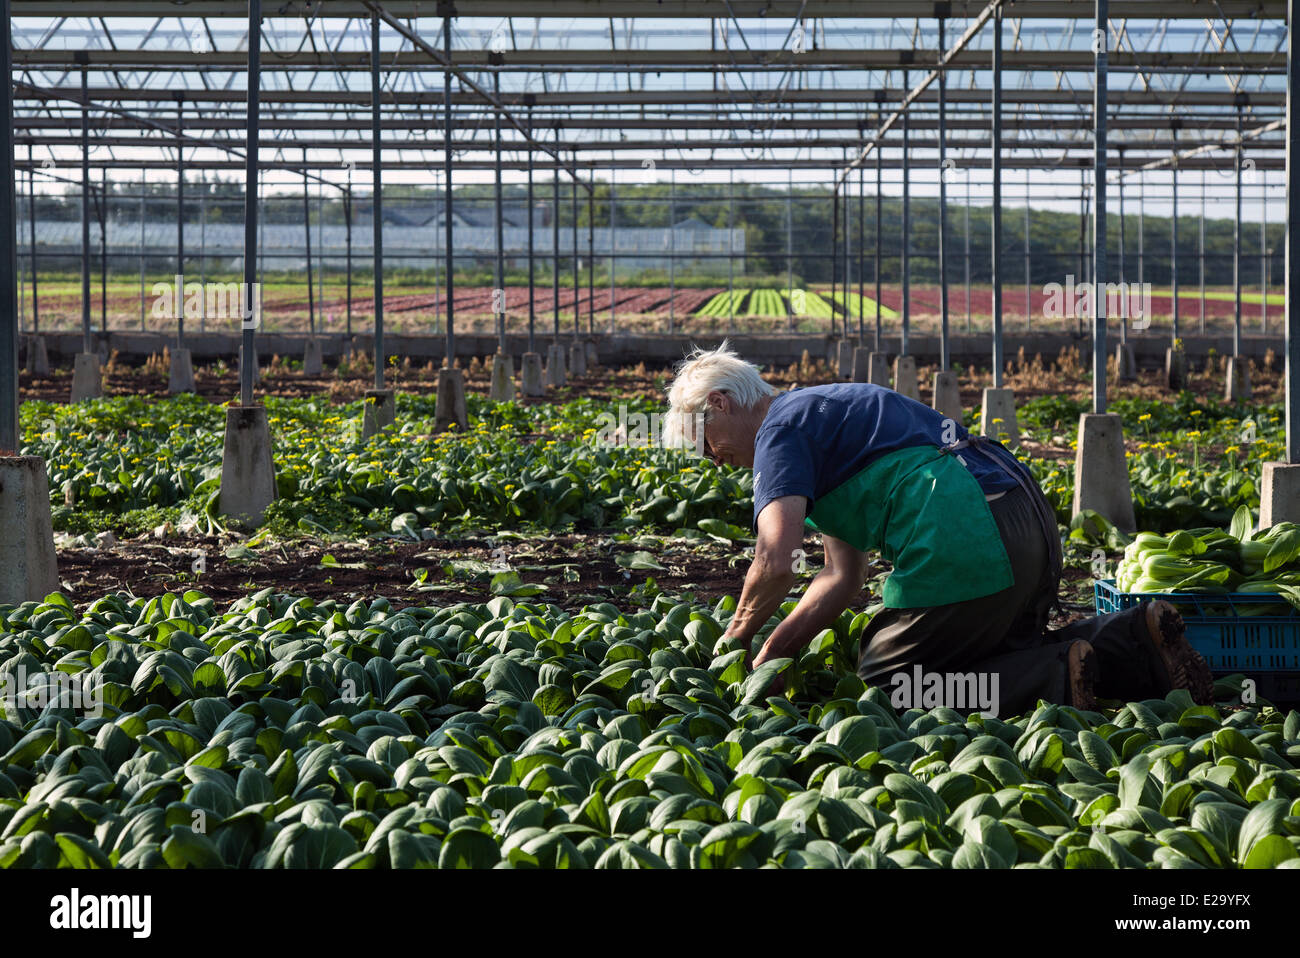 Woman Harvesting Greenhouse Brassica rapa Salad Crops in sweltering conditions in Tatleton UK. Bonita Abram picking the second crop of Tatsoi lettuce for market as the continuing good weather makes for a good growing season in this market gardening area.  British Salad consumption is now at its highest level in the history of eating and the summer months mean demand goes crazy, which is all good news for the regions salad bowl, the West Lancashire coastal plain between Preston and Southport where miles of rich, black soil provide an ideal growing medium. Stock Photo